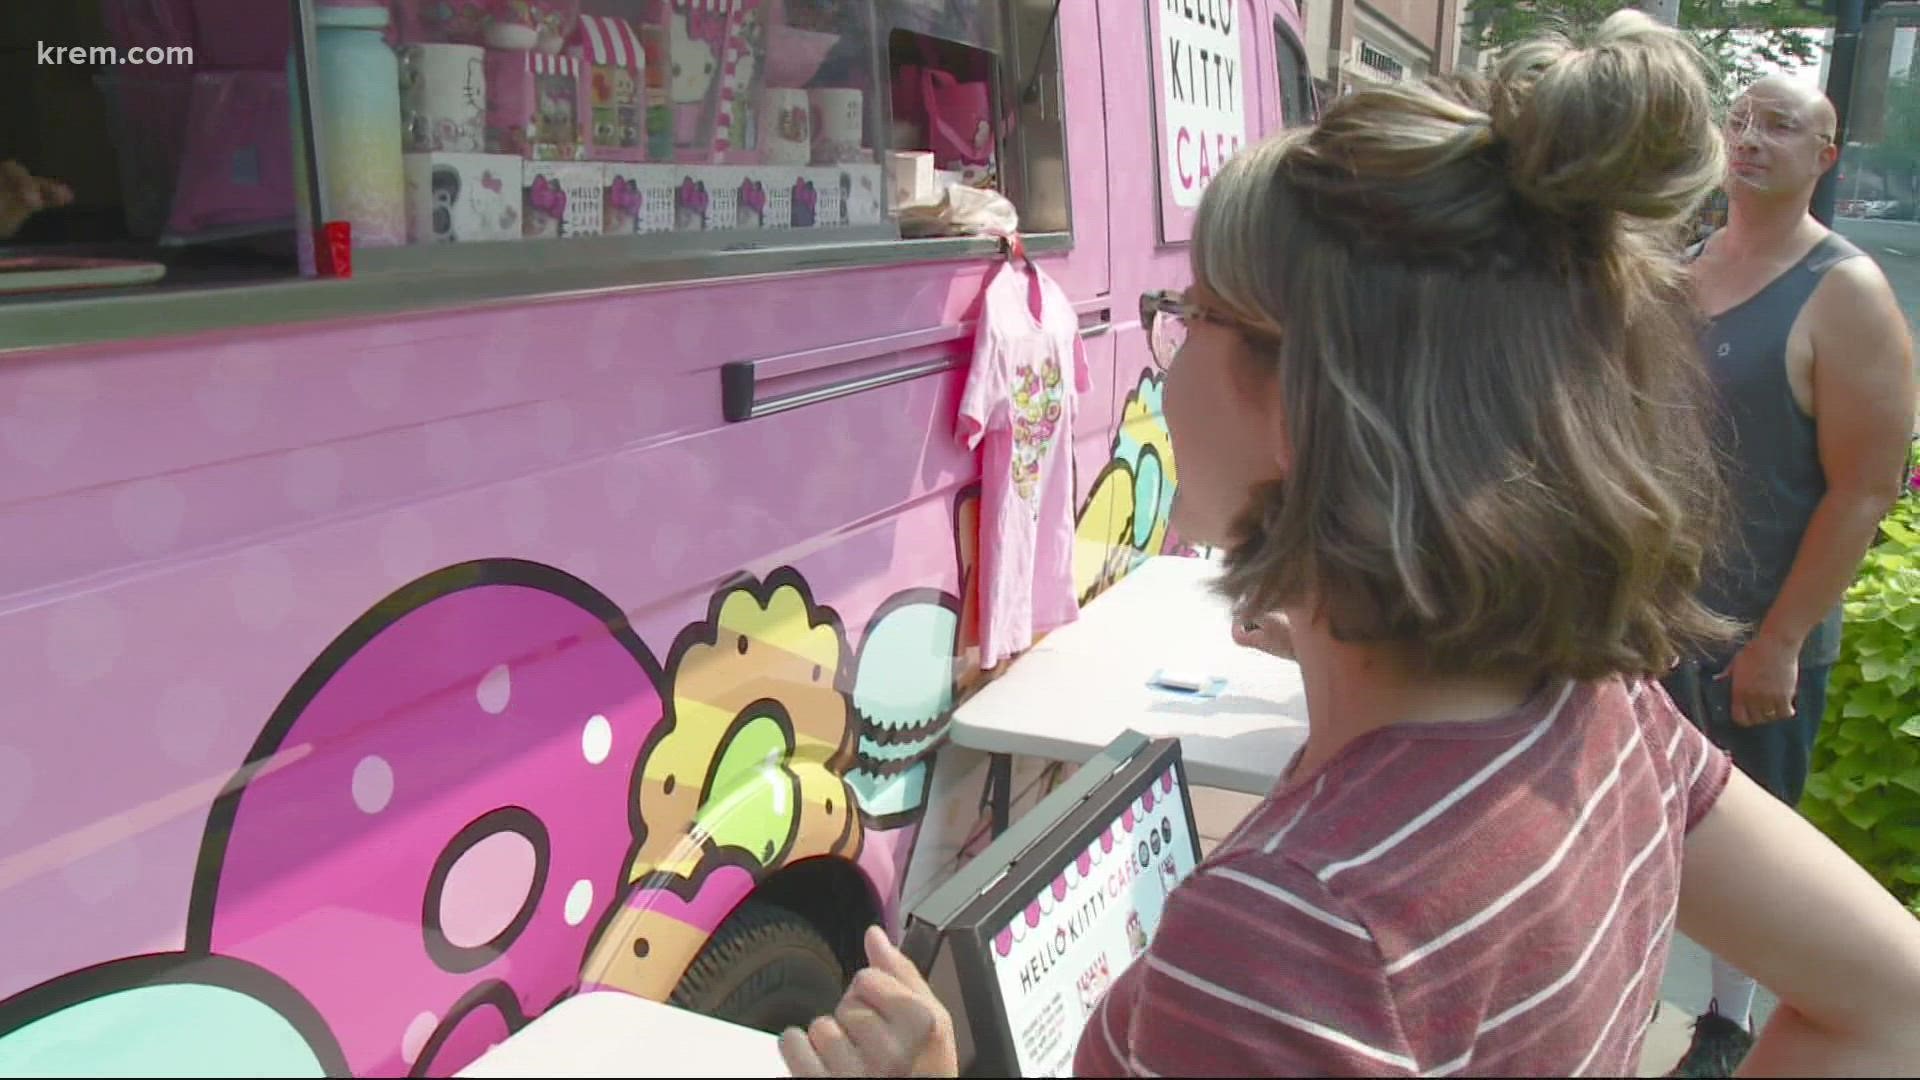 The Food Truck provided Hello Kitty-themed merchandise as well.